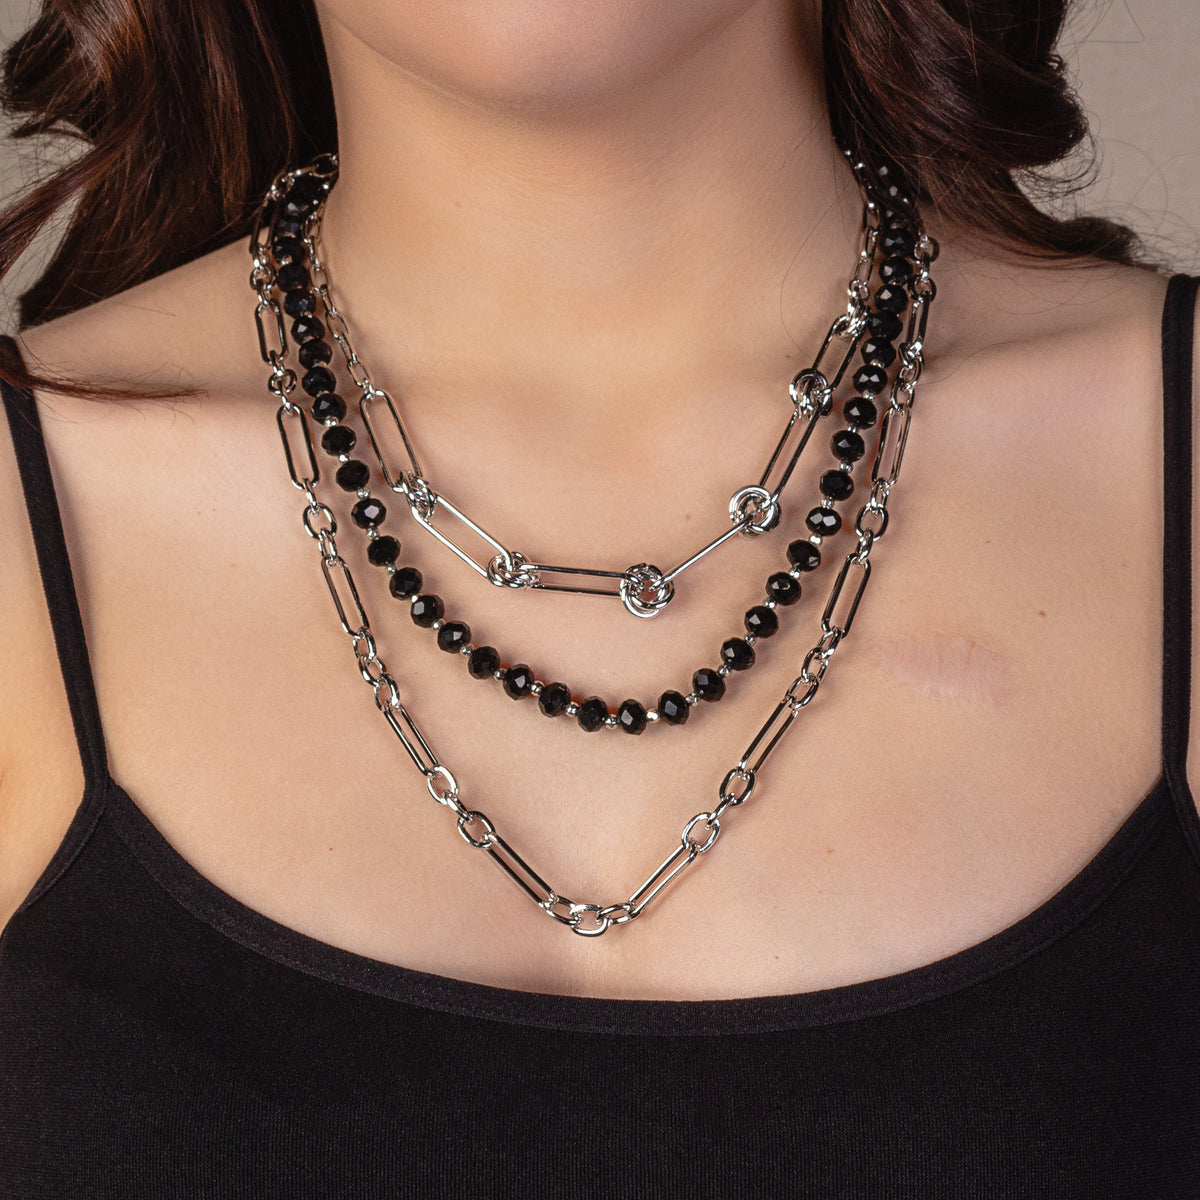 1137 - Layered Chain Necklace - Black